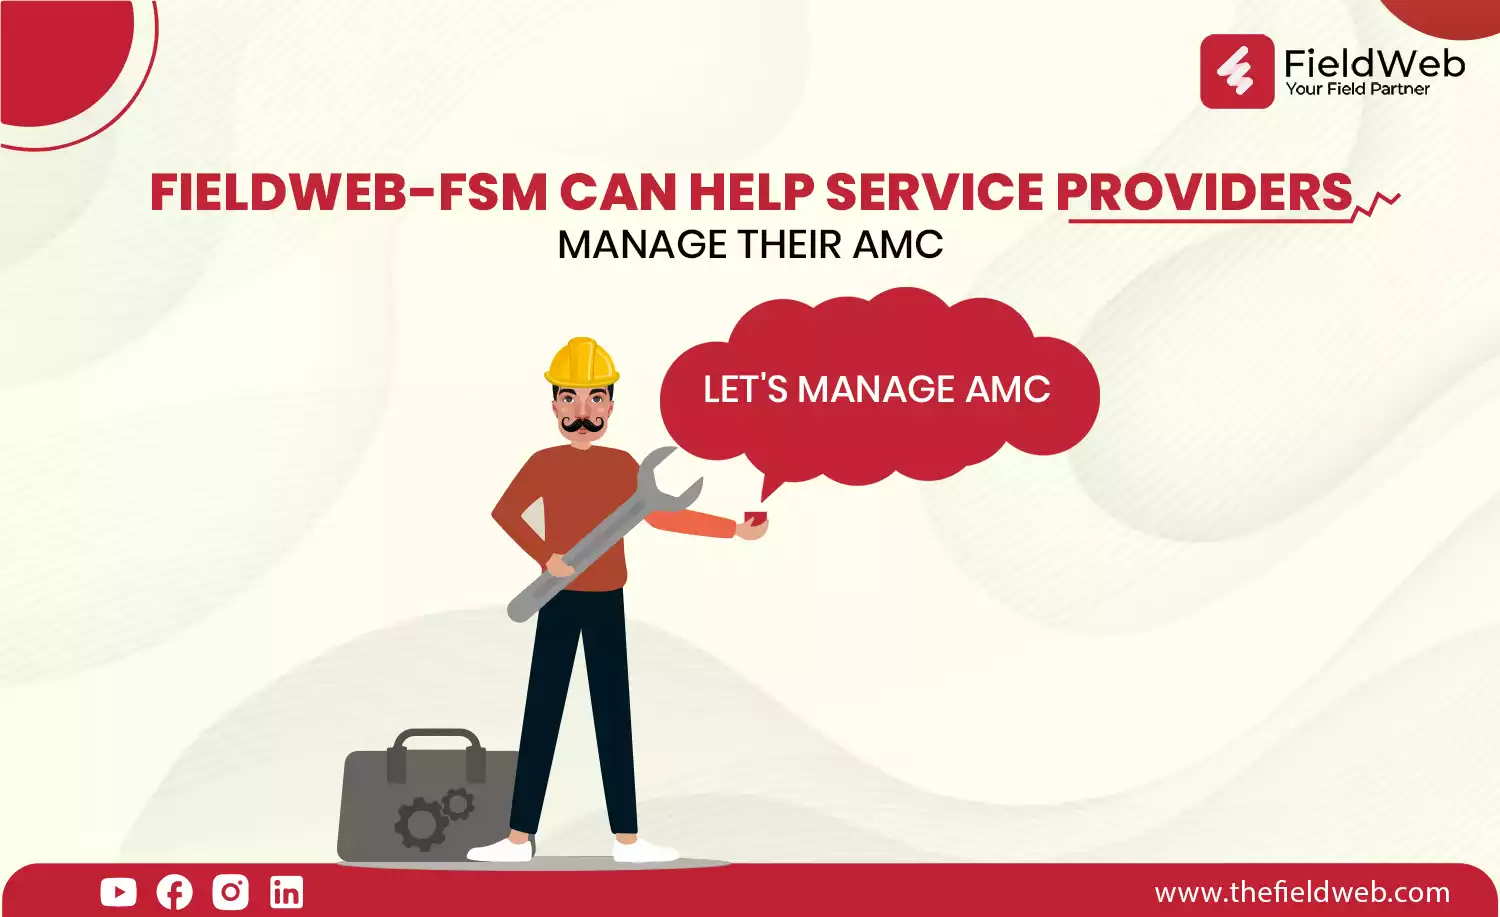 fieldweb mascot stand with taking repairing instrument and manage amc software 